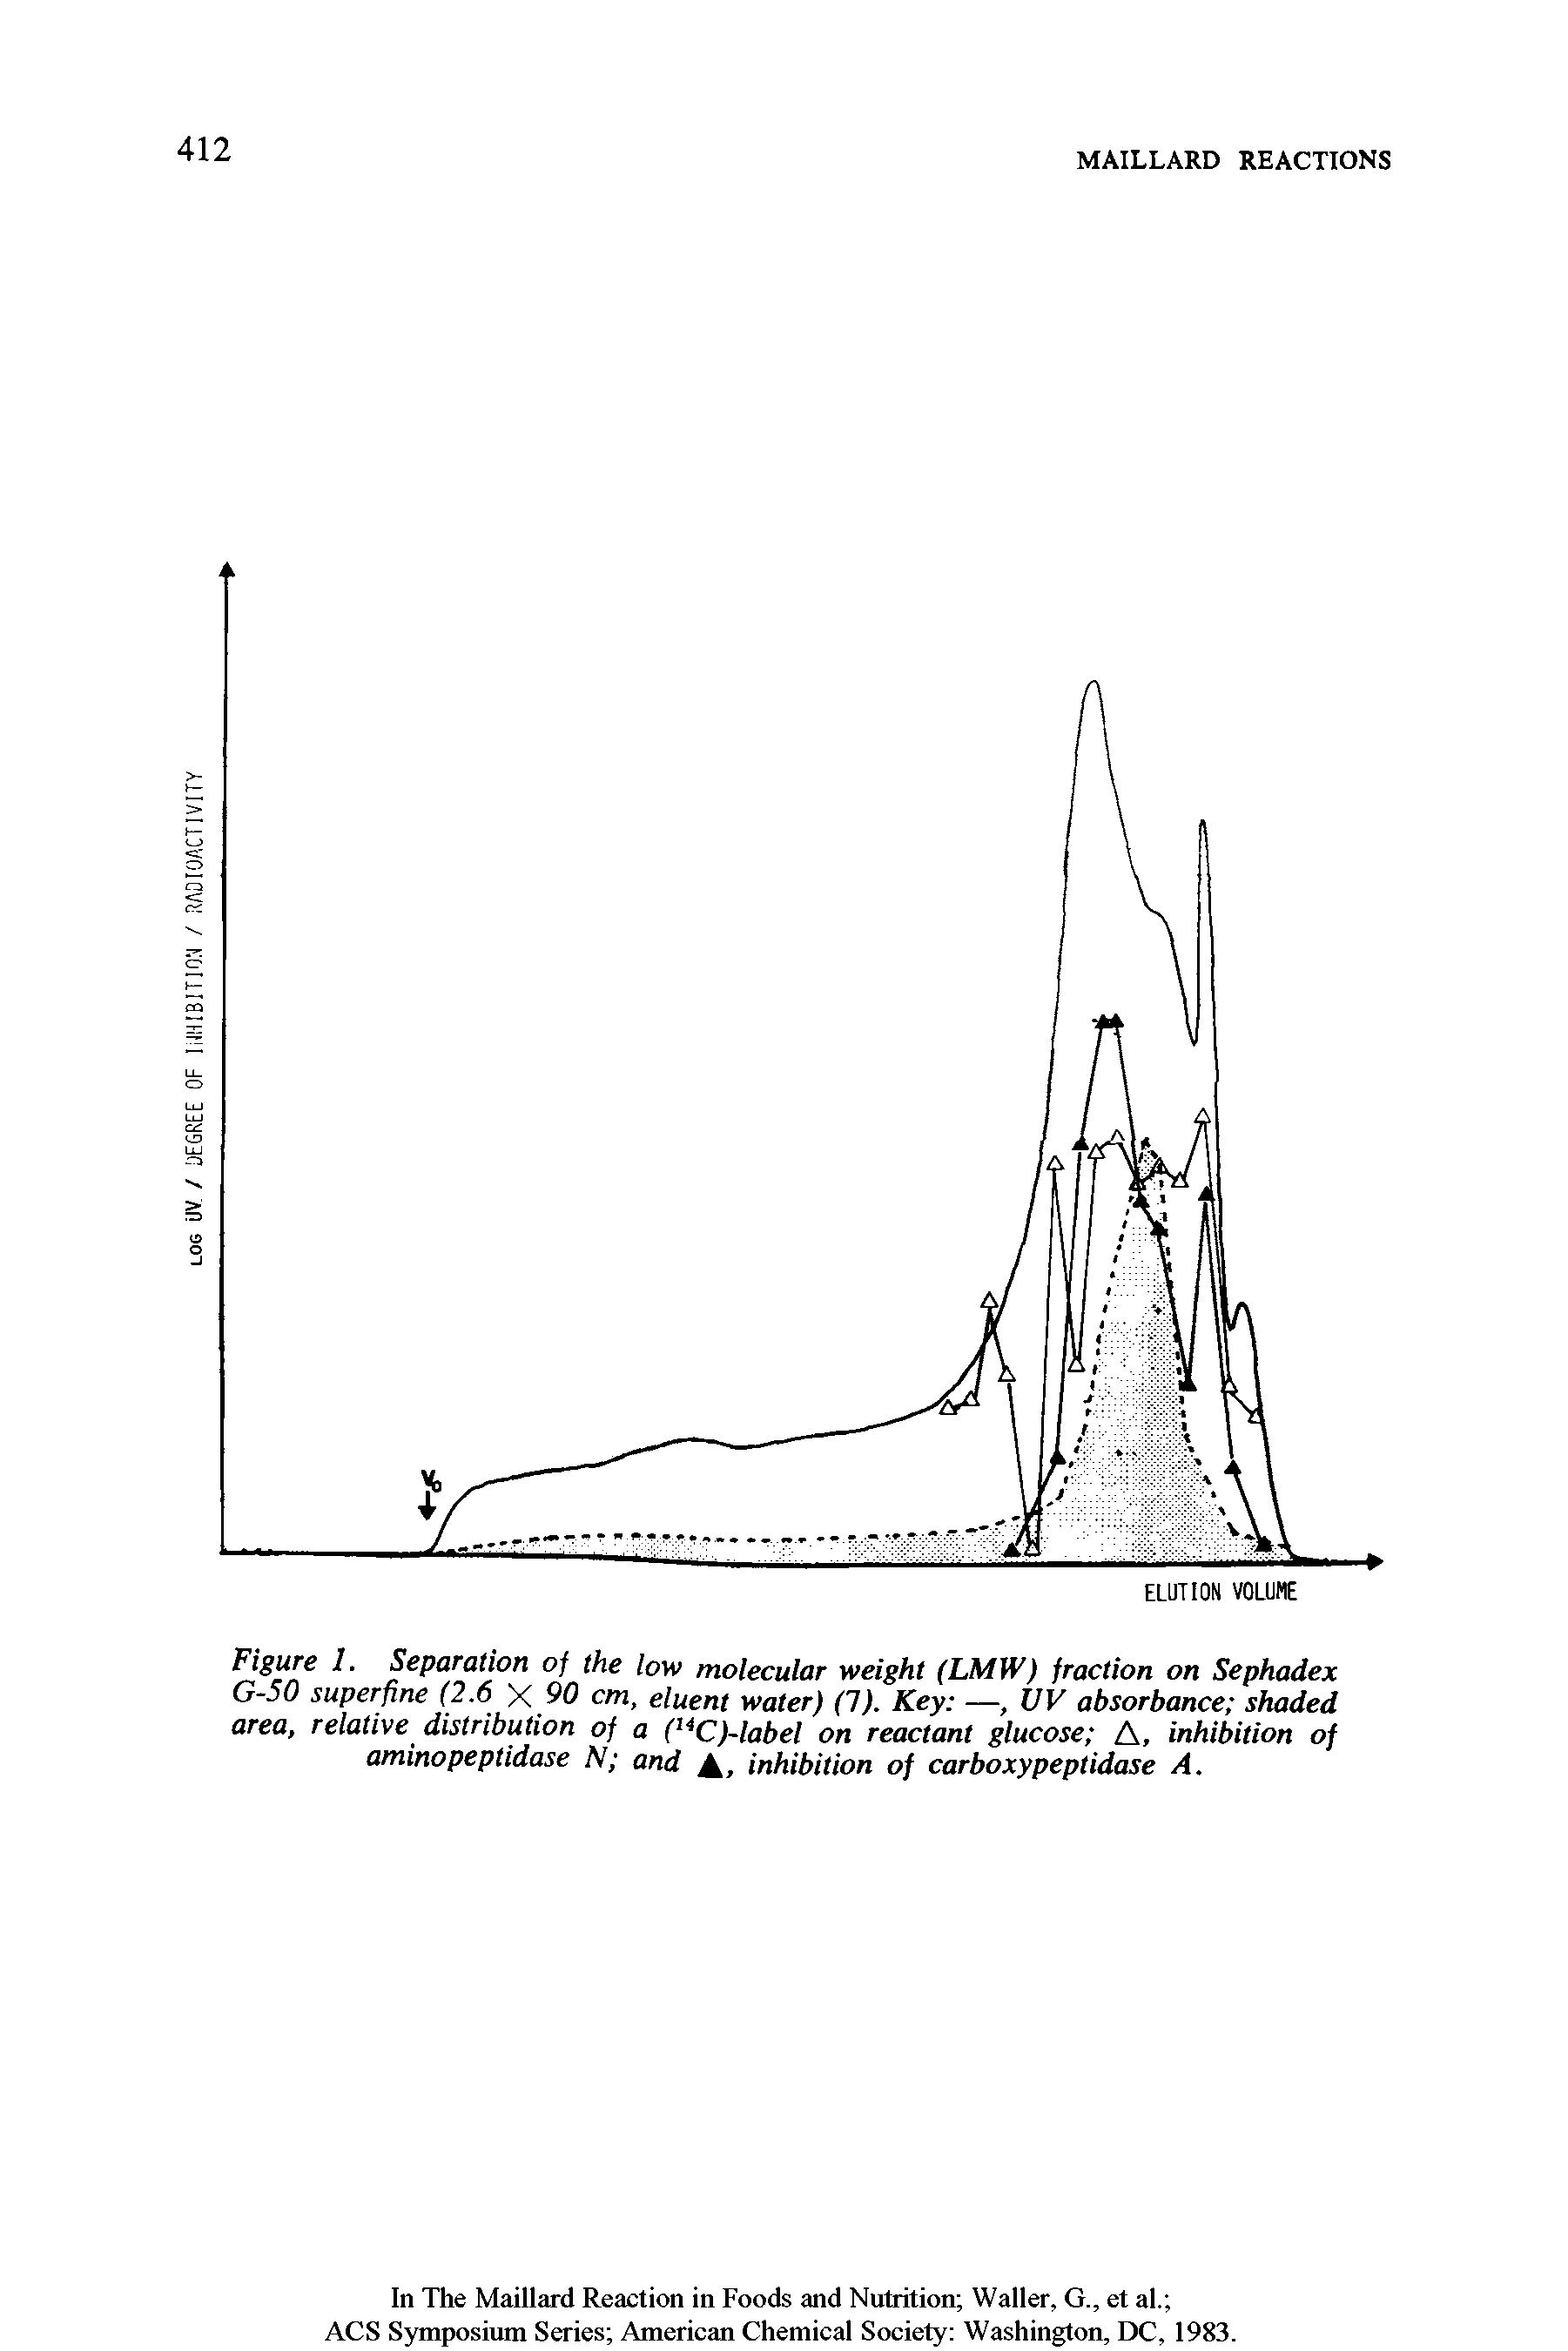 Figure 1. Separation of the low molecular weight (LMW) fraction on Sephadex G-50 superfine (2.6 X 90 cm, eluent water) (1). Key —, UV absorbance shaded area, relative distribution of a (,4C)-label on reactant glucose A, inhibition of aminopeptidase N and inhibition of carboxypeptidase A.